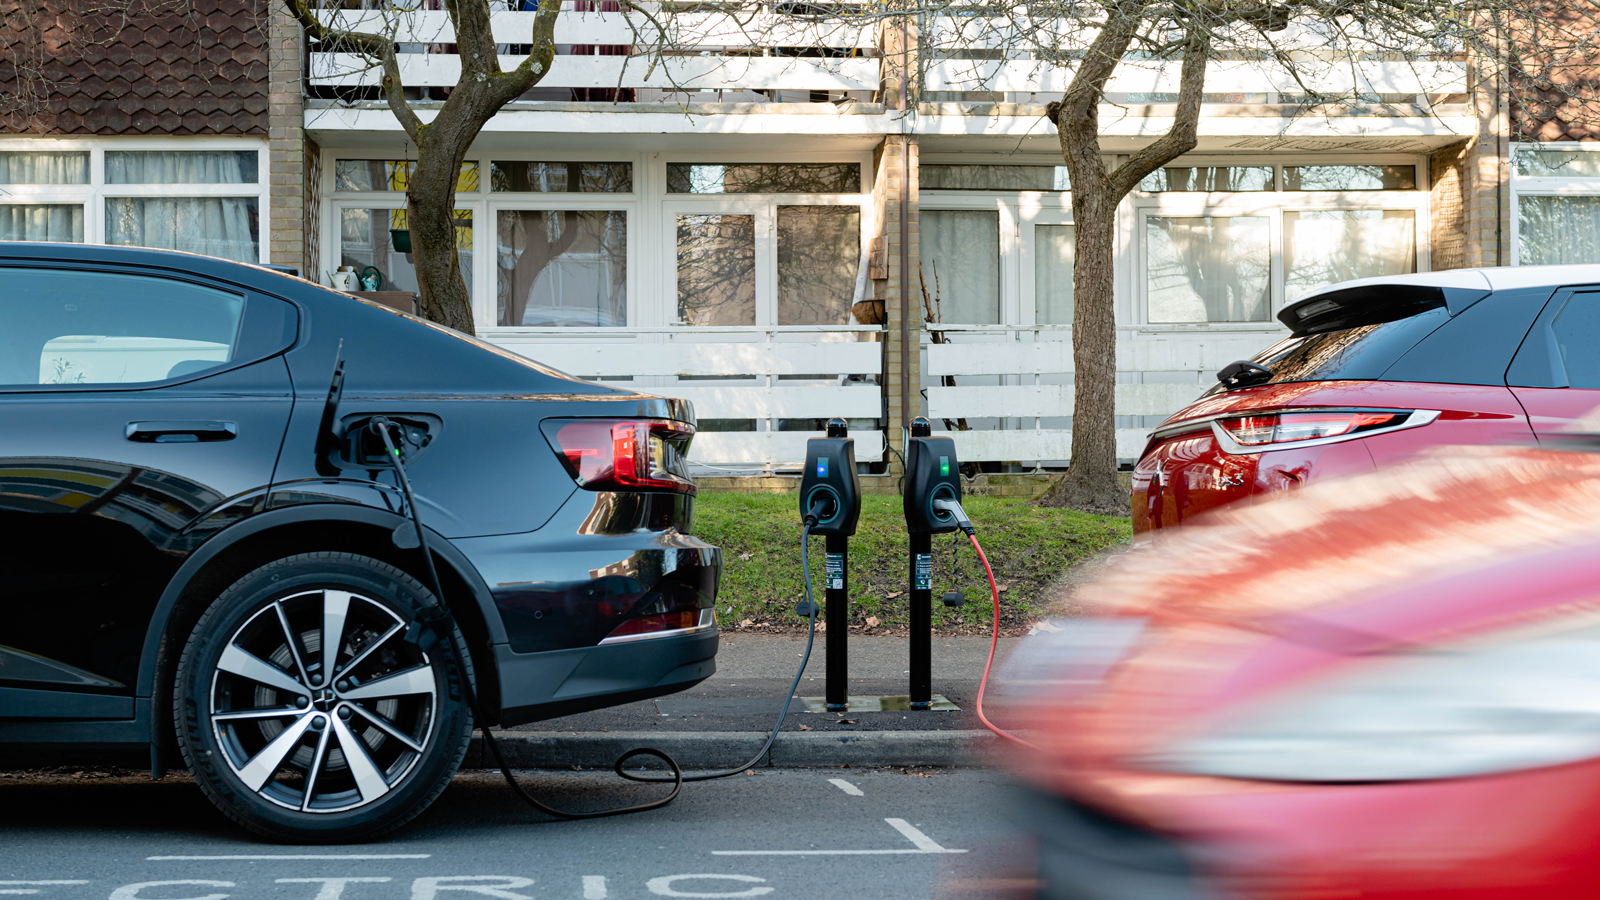 UK drivers set to save £1.5bn on public EV charge points that schedule off-peak charging